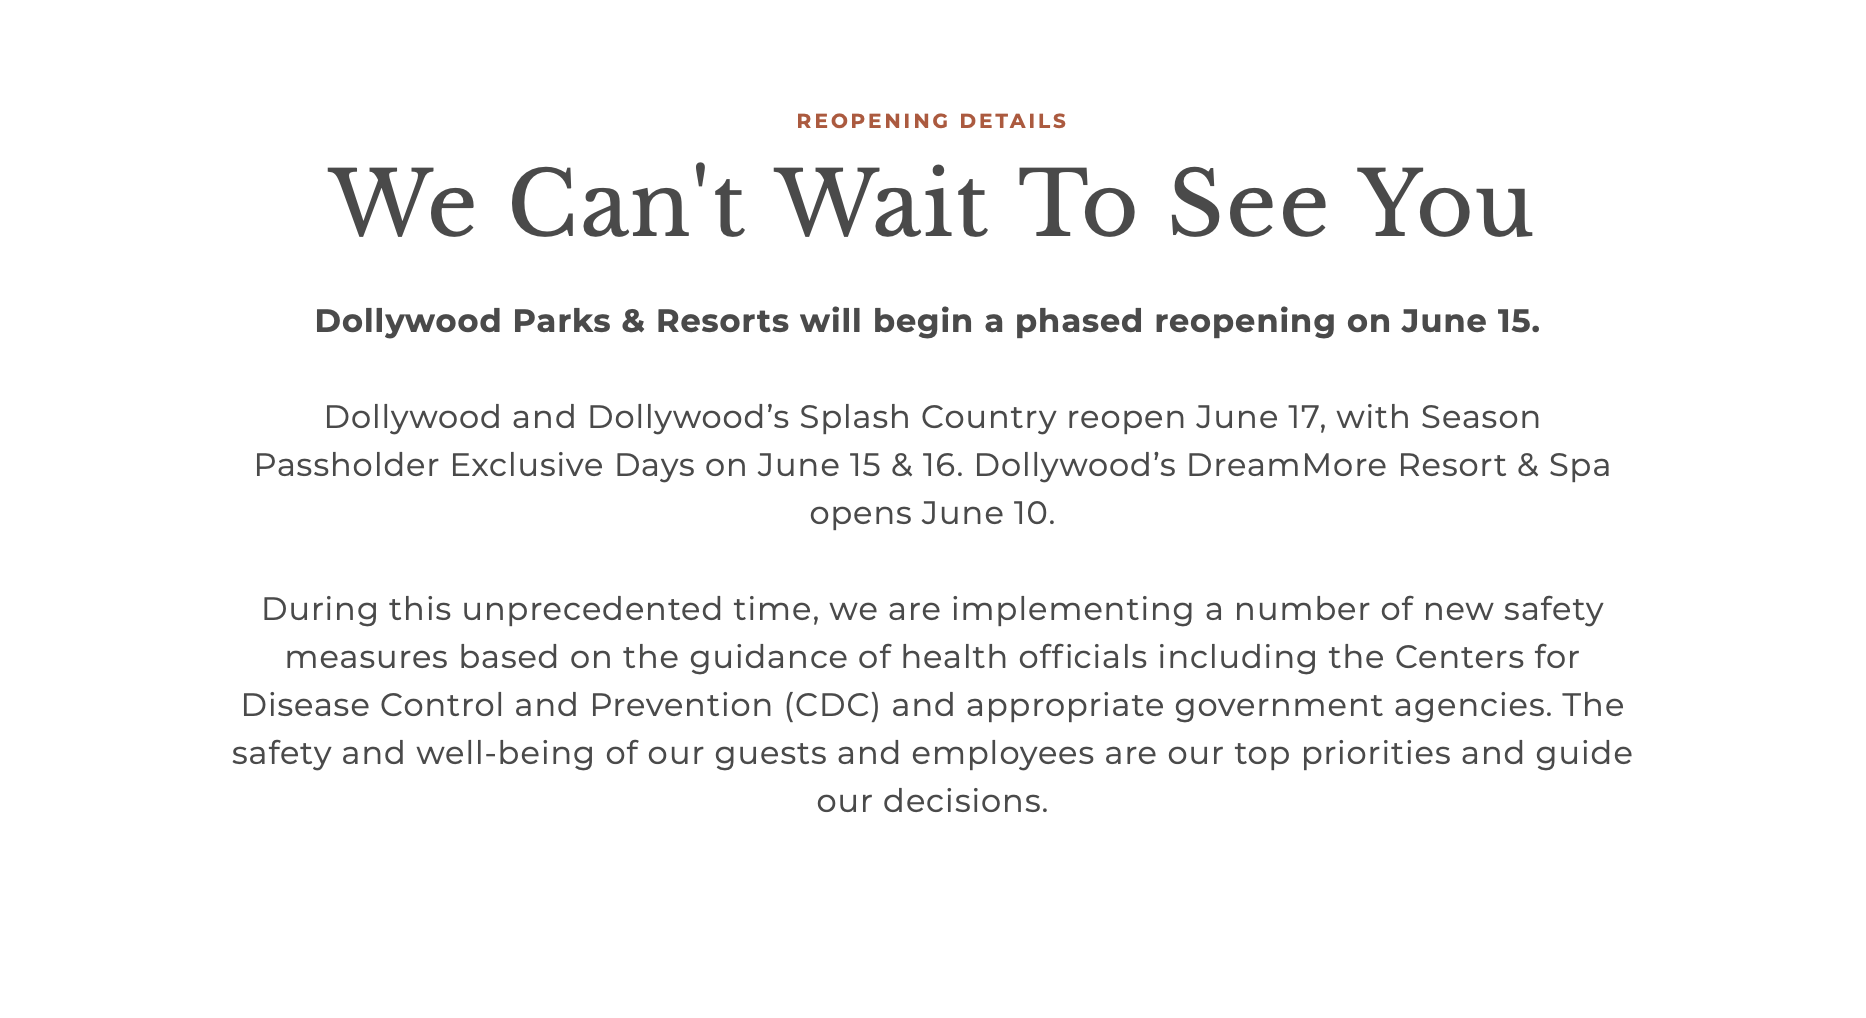 Dollywood Parks & Resorts will begin a phased reopening on June 15